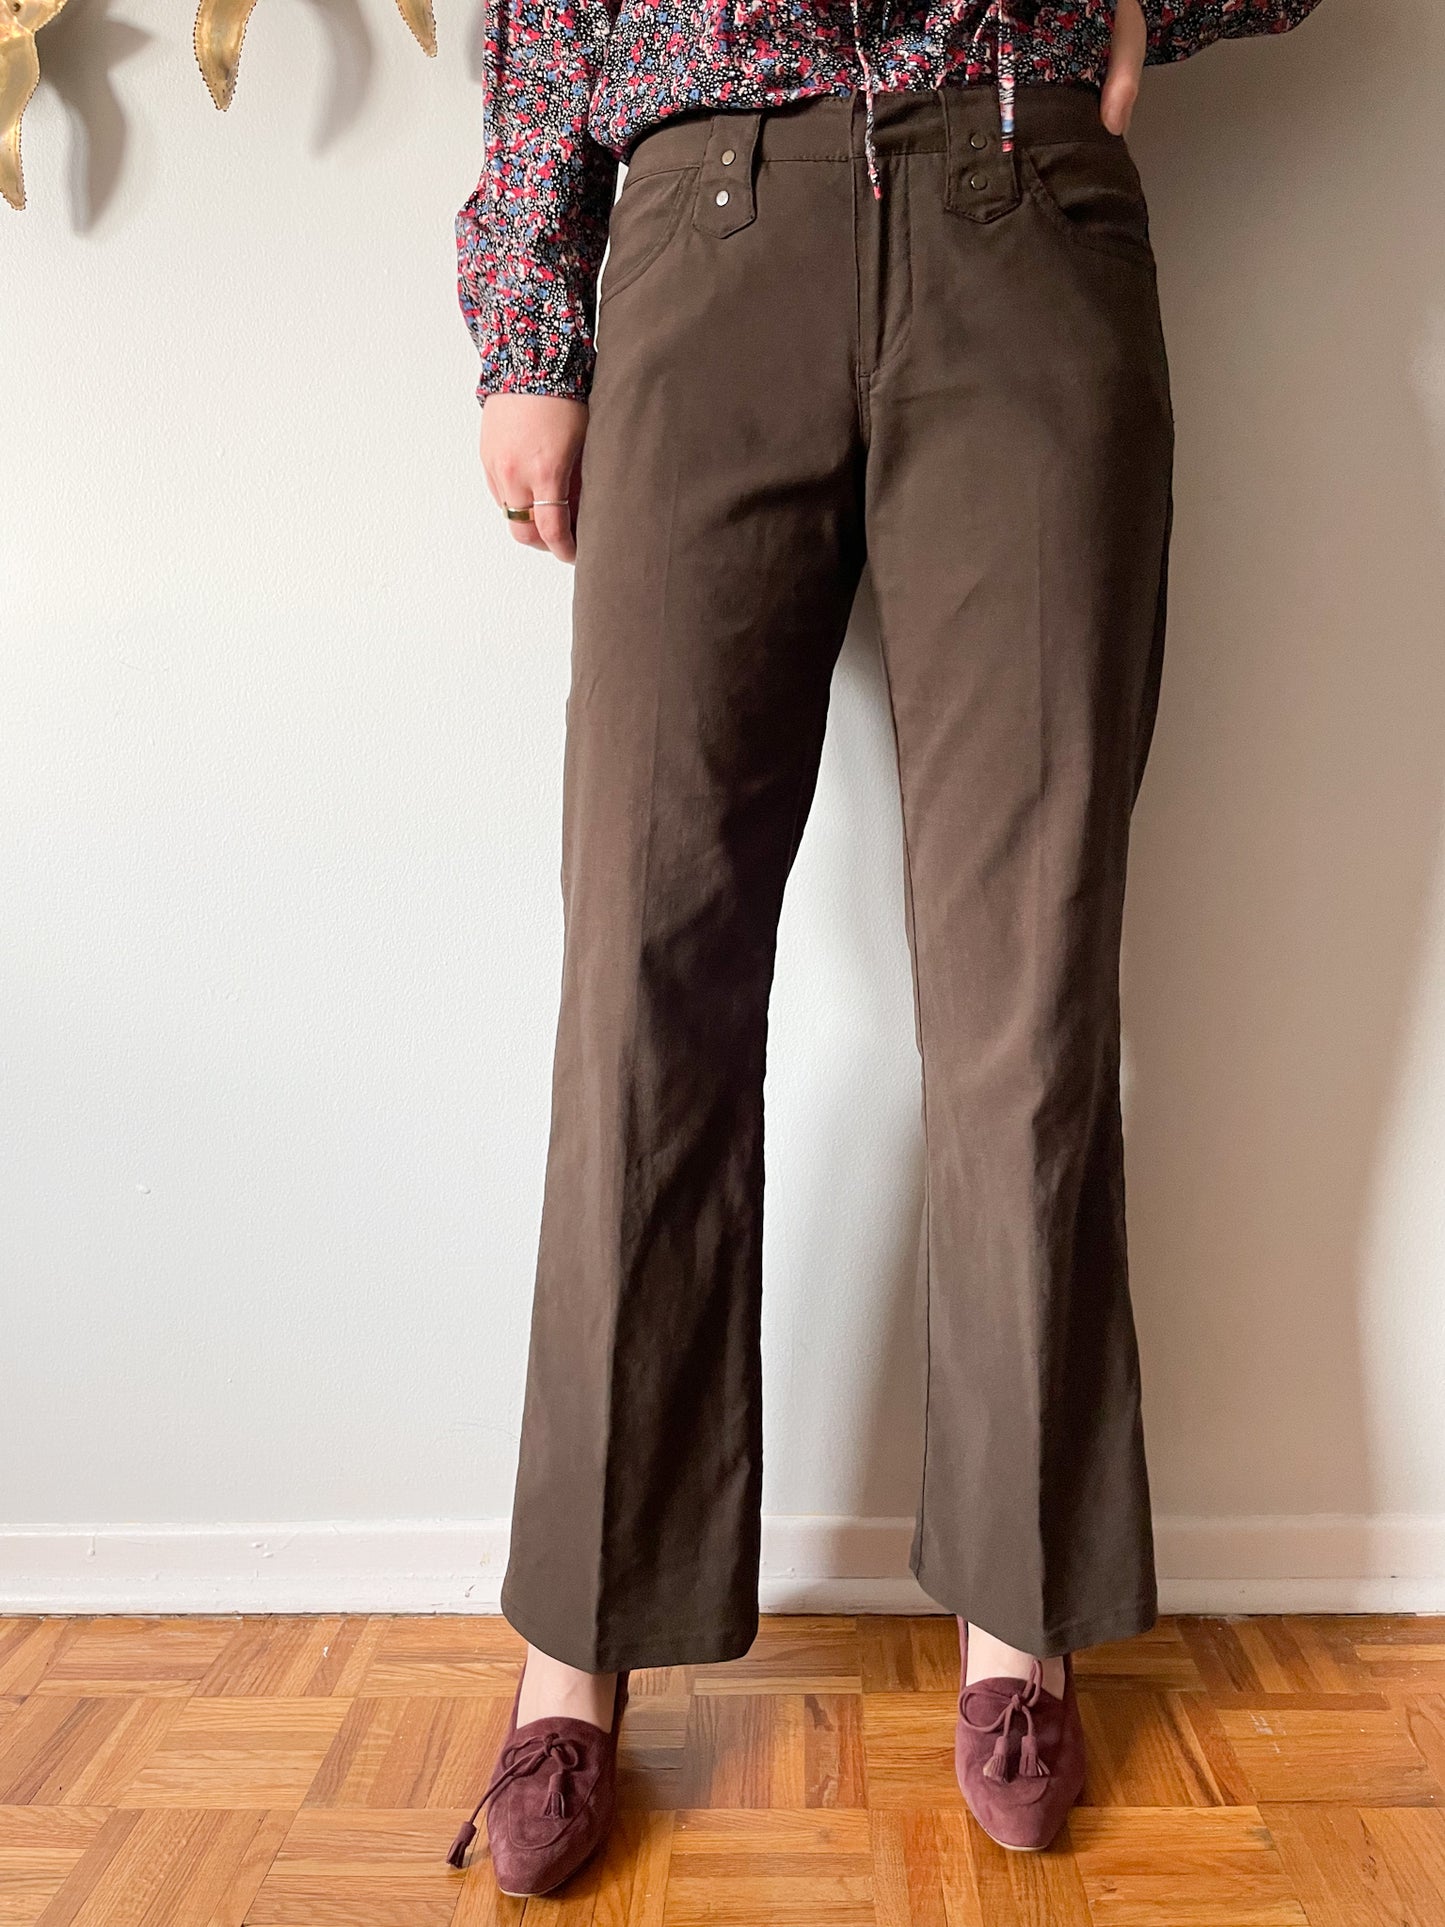 MEXX Brown Mid Rise Straight Leg Cotton Blend Cropped Trouser Pants - Small